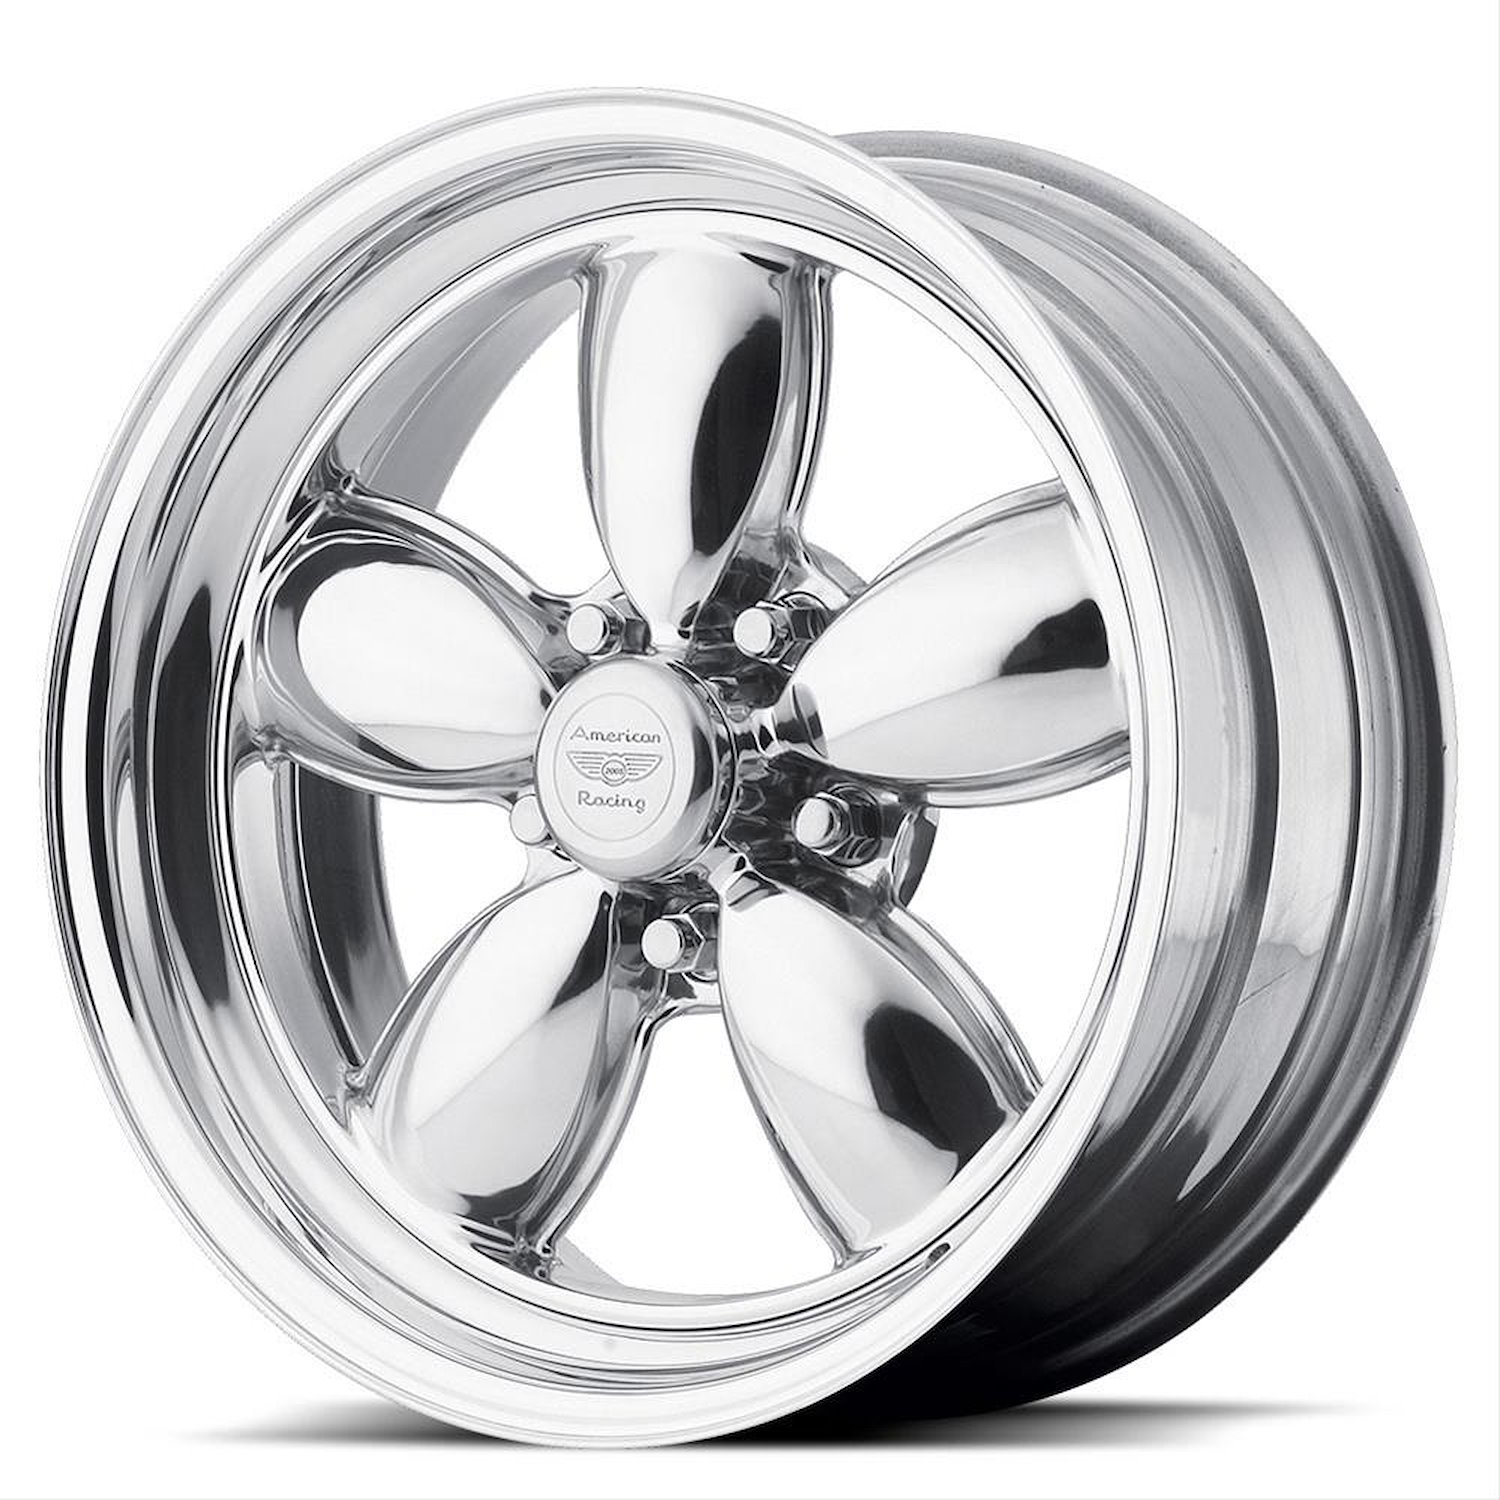 AMERICAN RACING CLASSIC 200S TWO-PIECE POLISHED 17 x 8 5x4.5 19 5.25